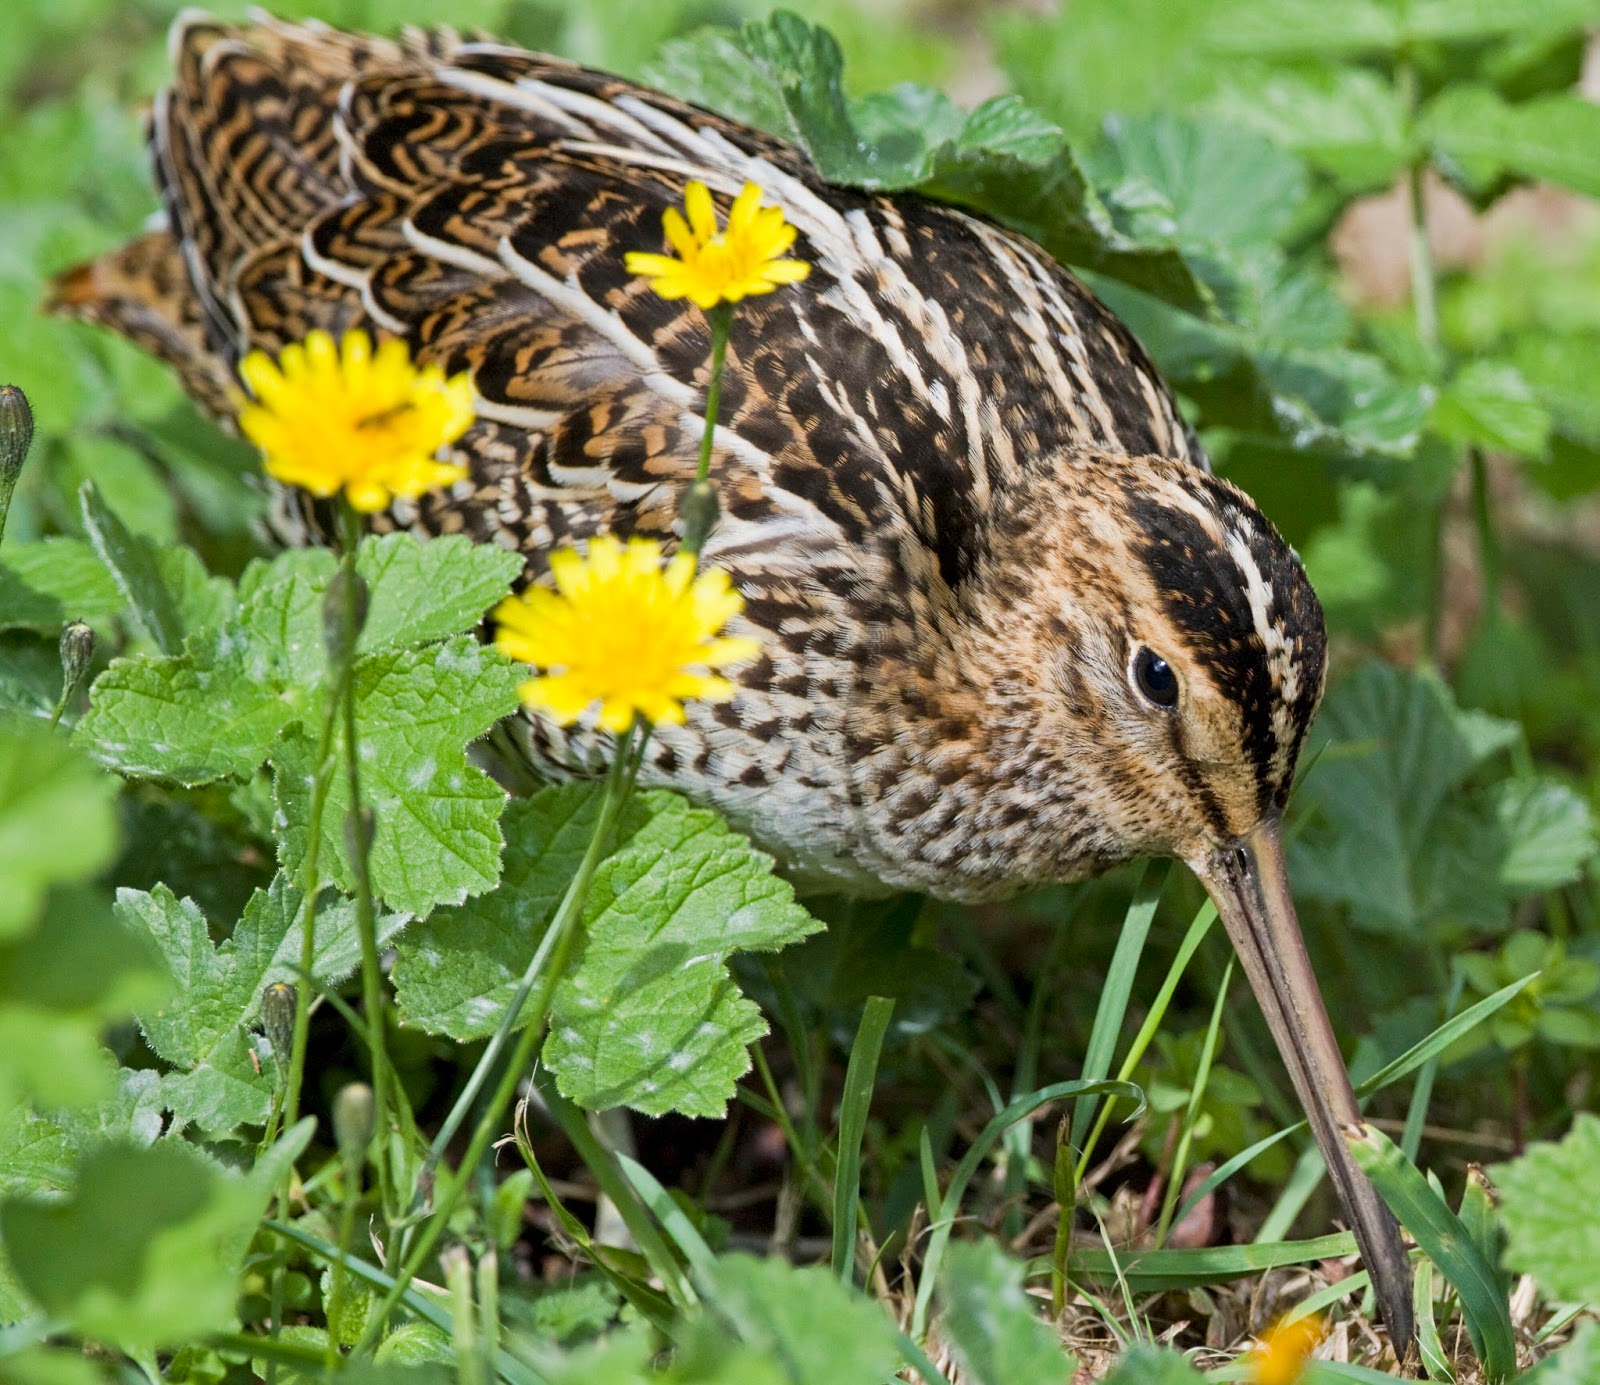 Snipe in the grass in search of hatchbacks